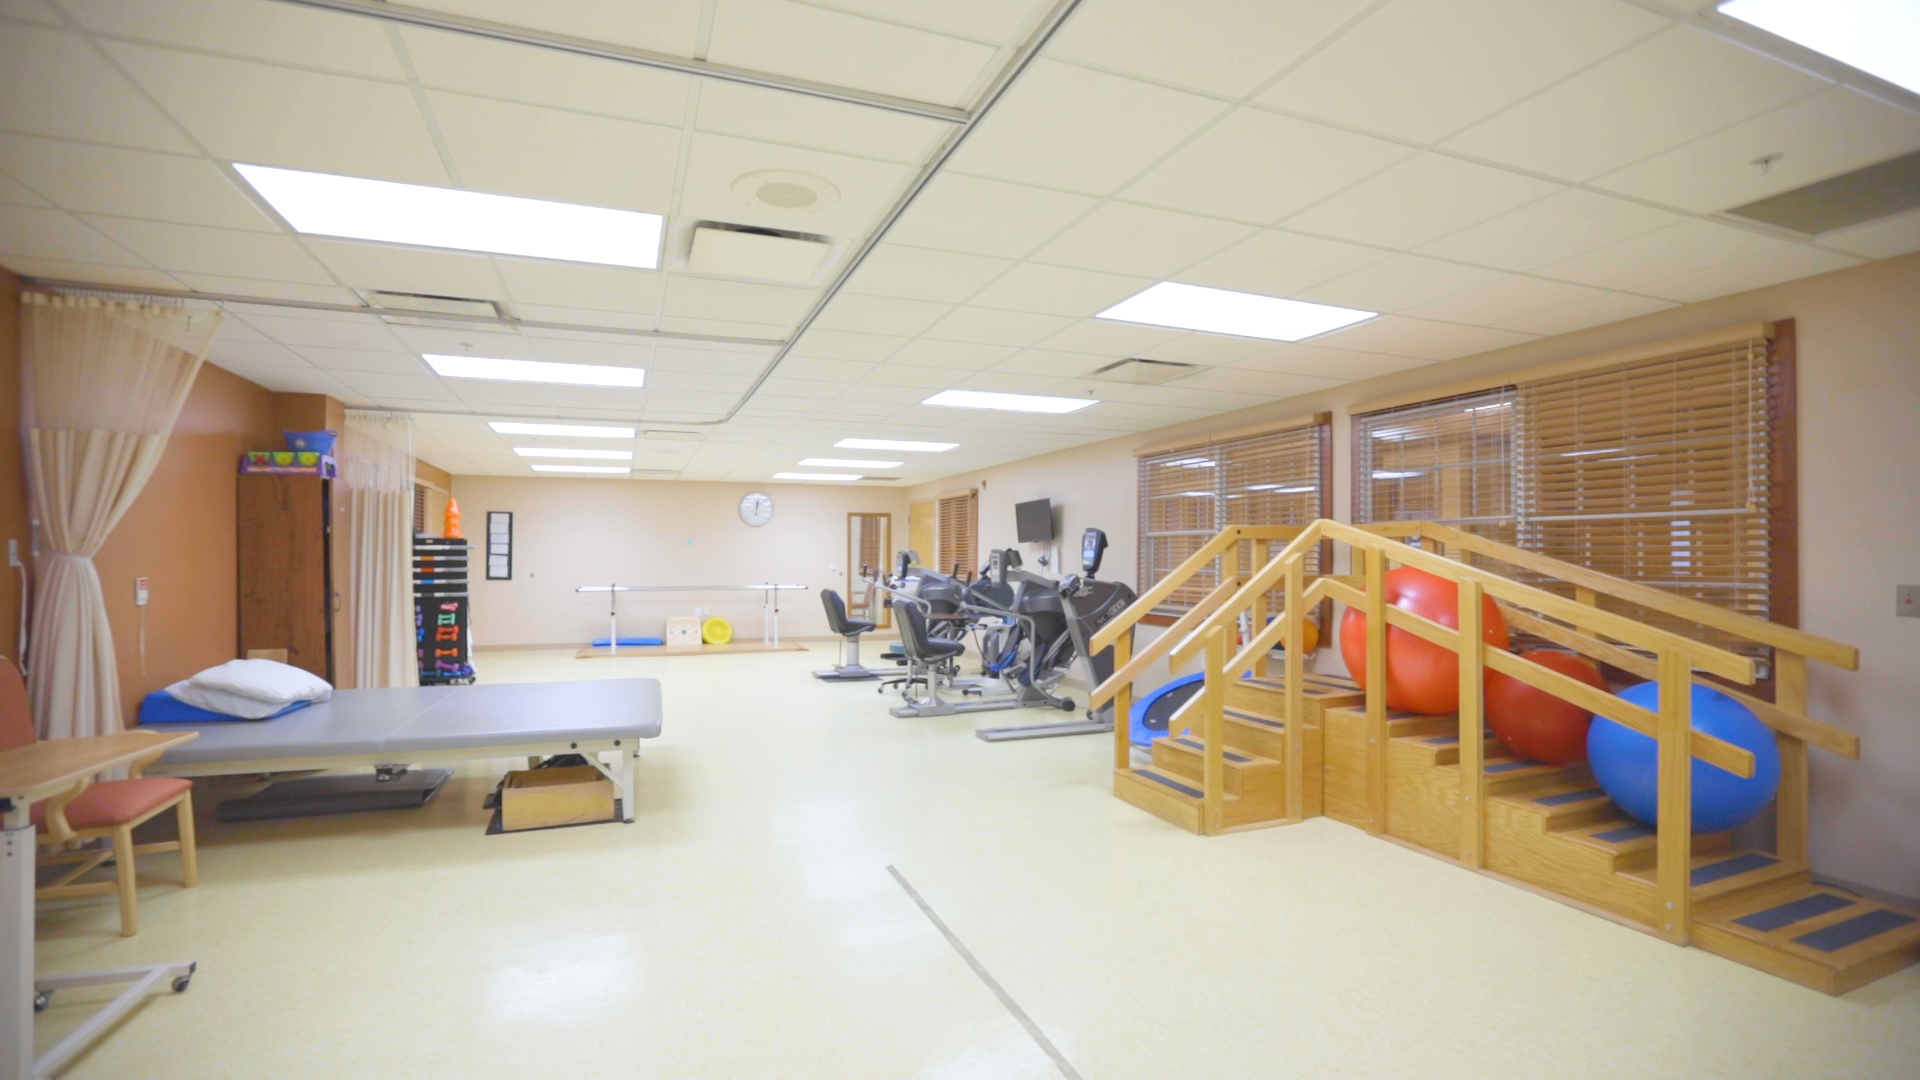 Treatment table, recumbent bike and wooden ladder in the gym.